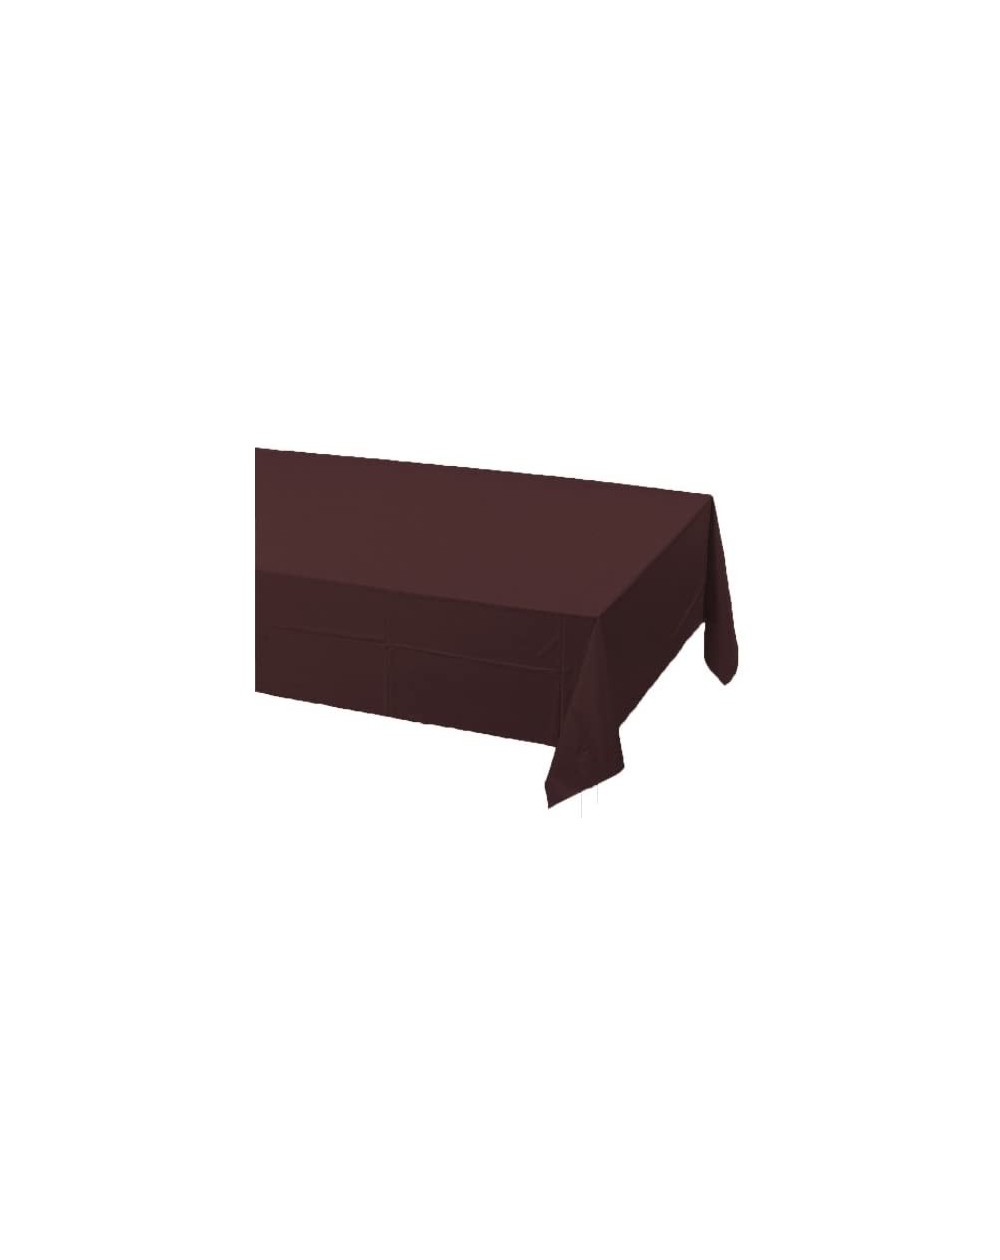 Tablecovers Touch of Color Plastic Table Cover- 54 by 108-Inch- Chocolate Brown - CS1163Z4WCZ $9.99